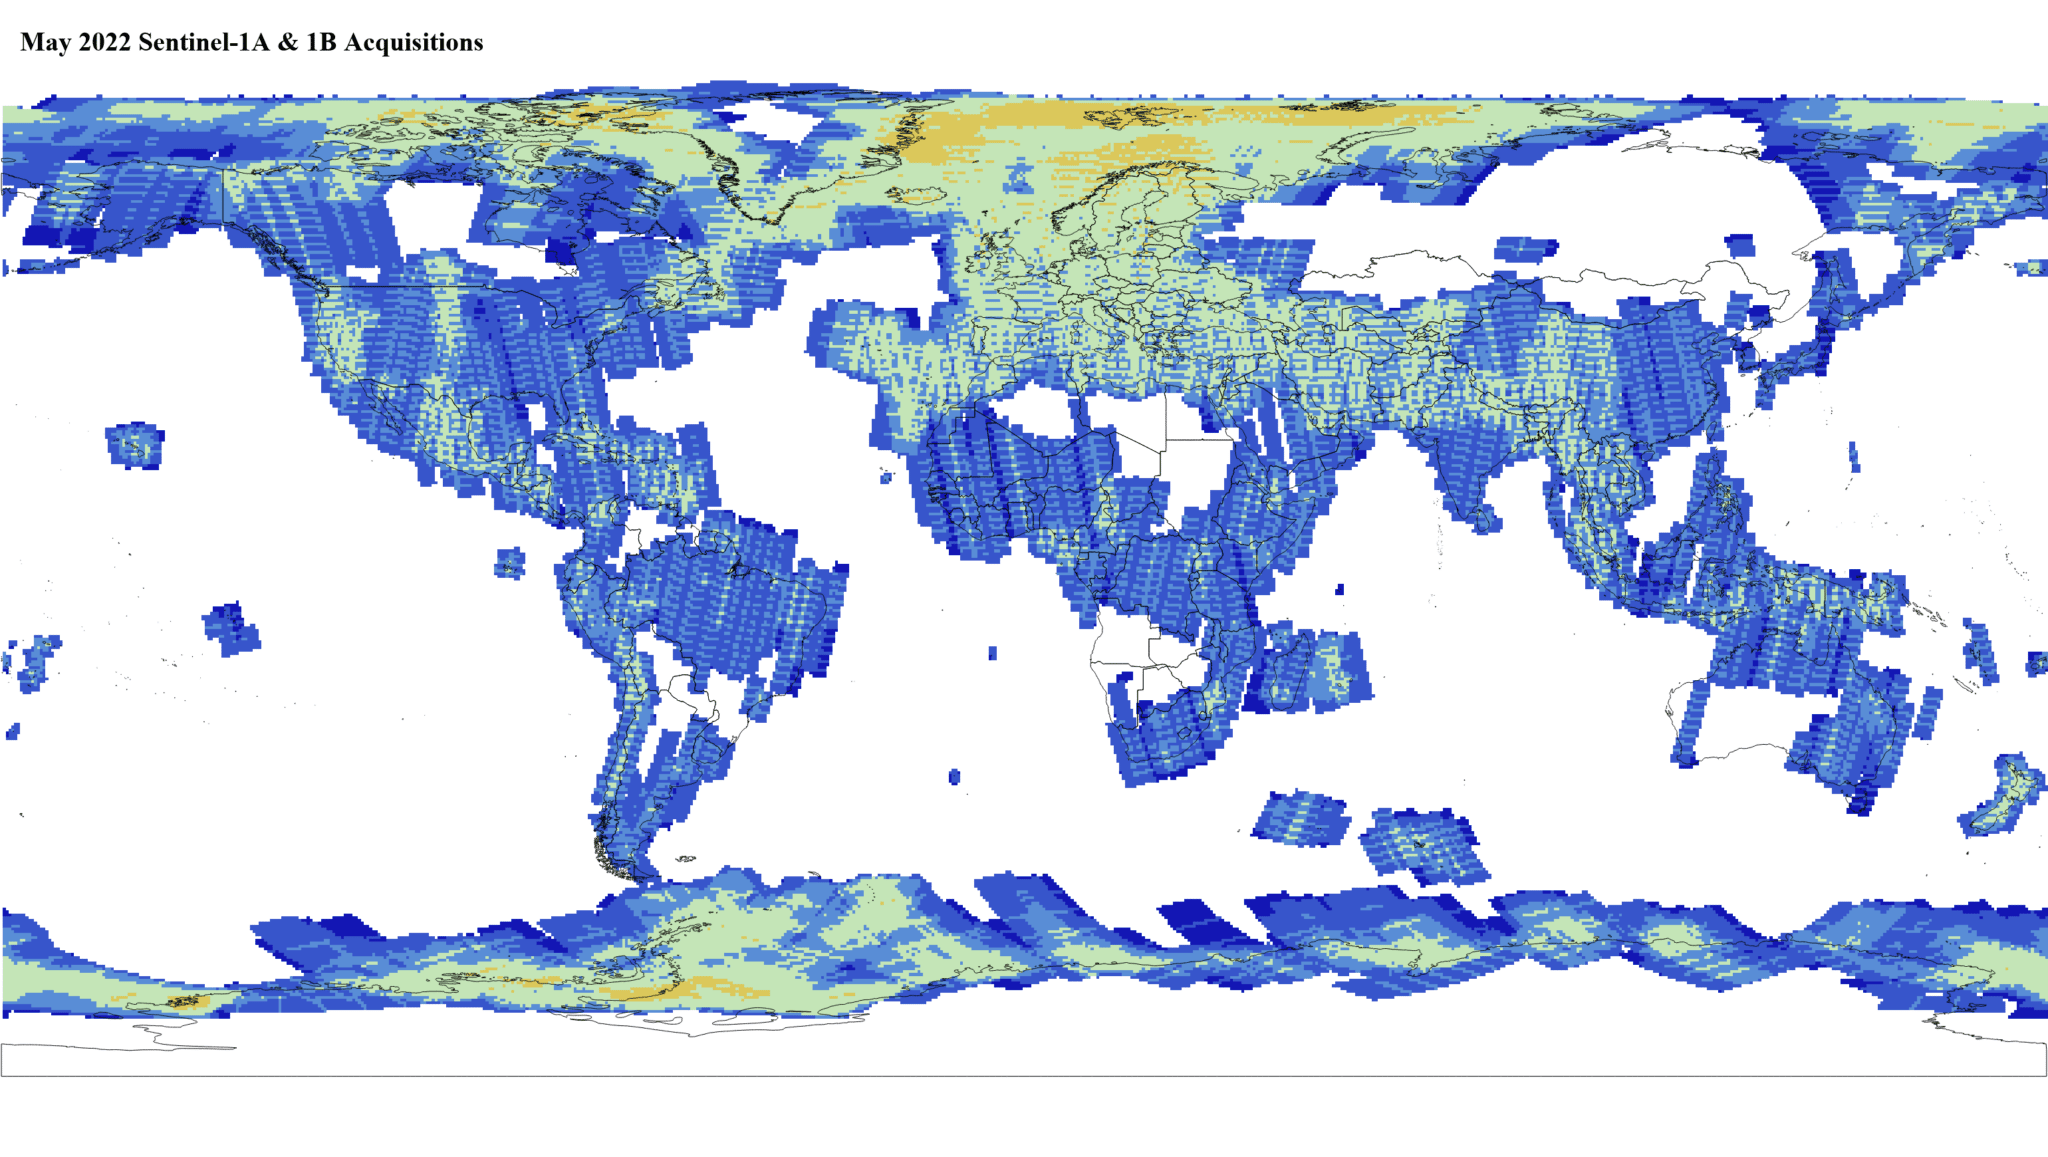 Heat map of Sentinel-1A and -1B GRD global acquisitions May 2022